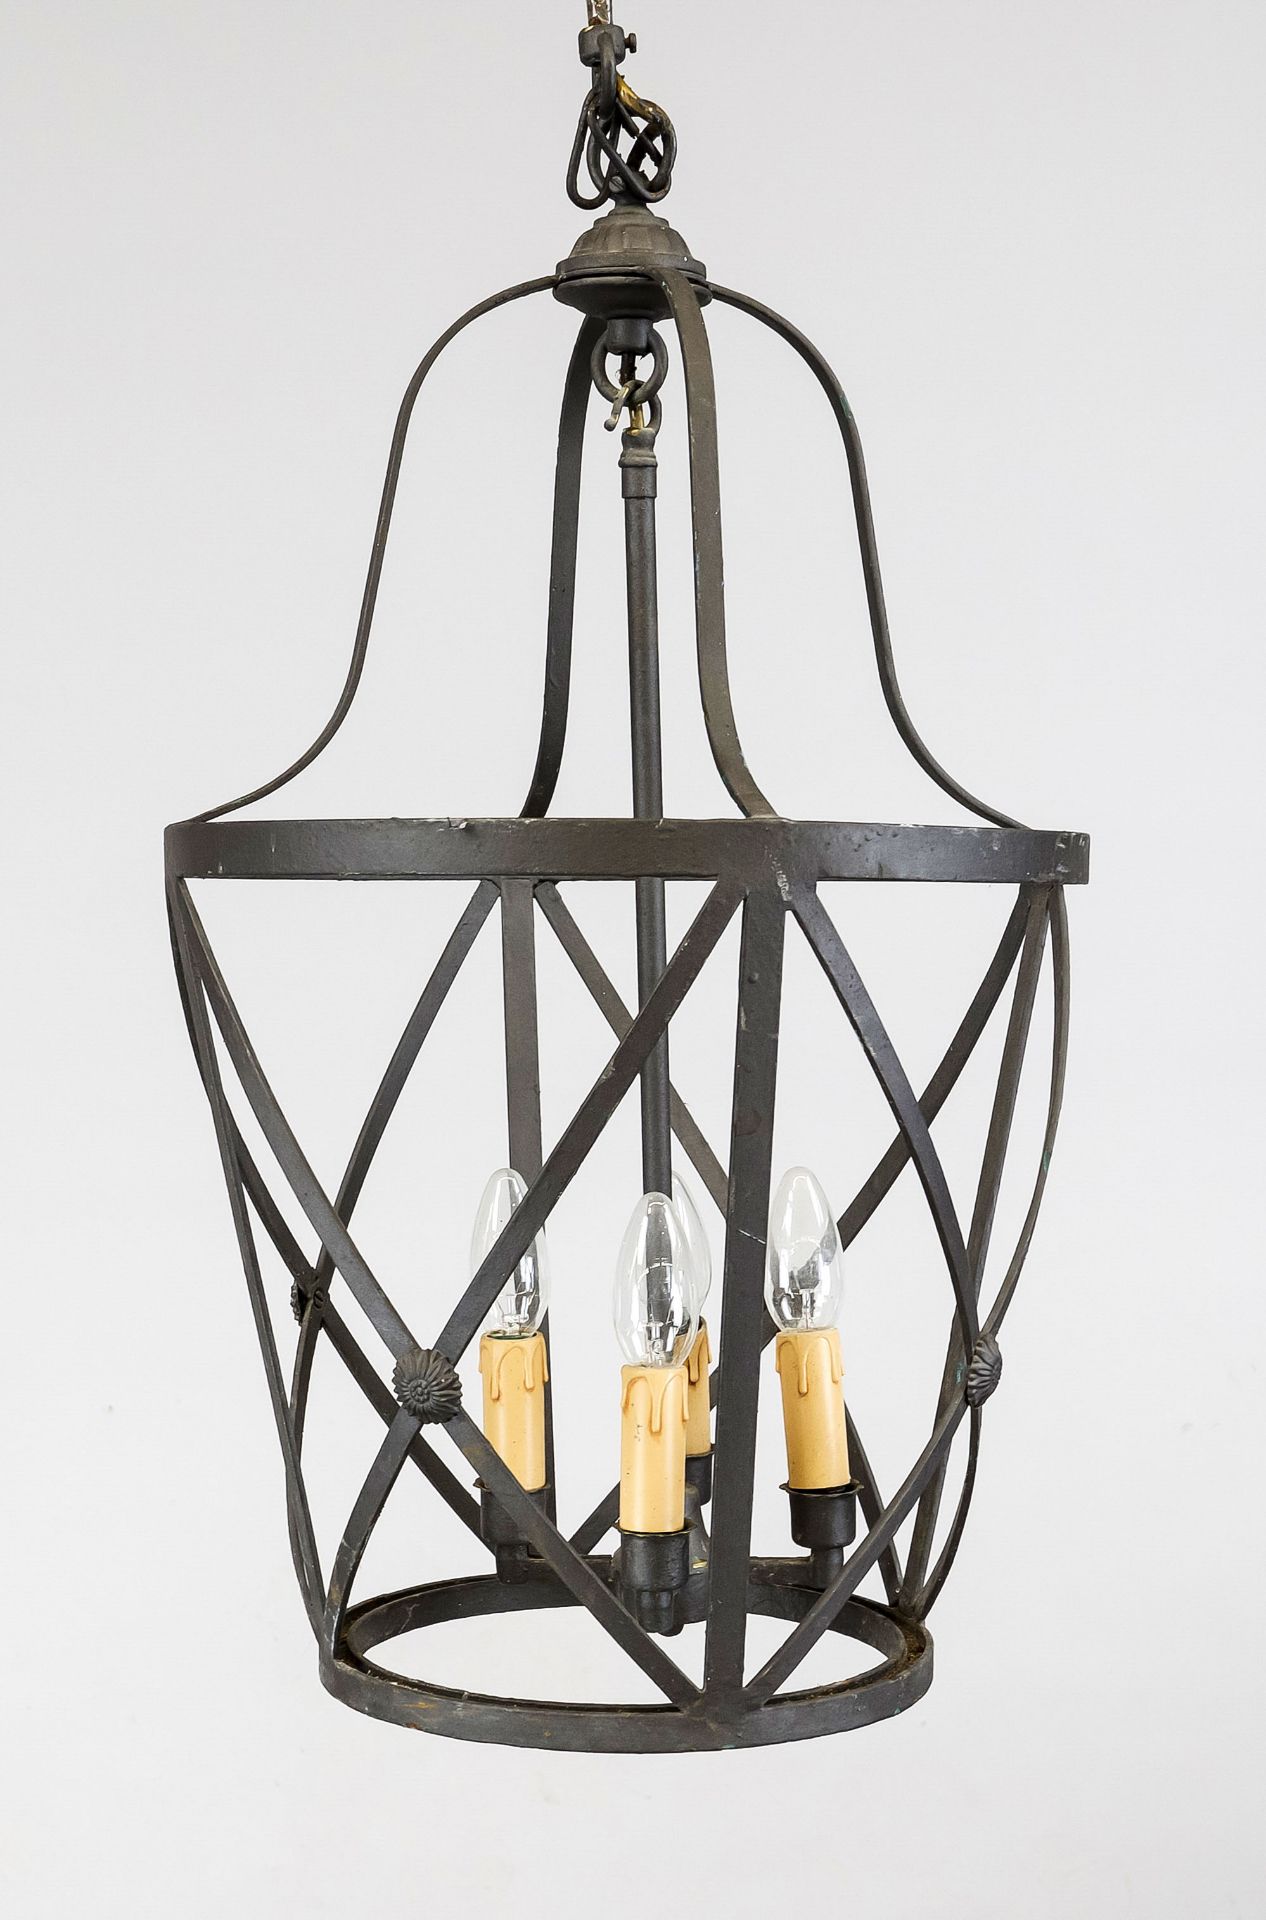 Ceiling lamp, 20th century, lacquered iron frame with 4 flames with candle holders, rubbed, h. 74/D.